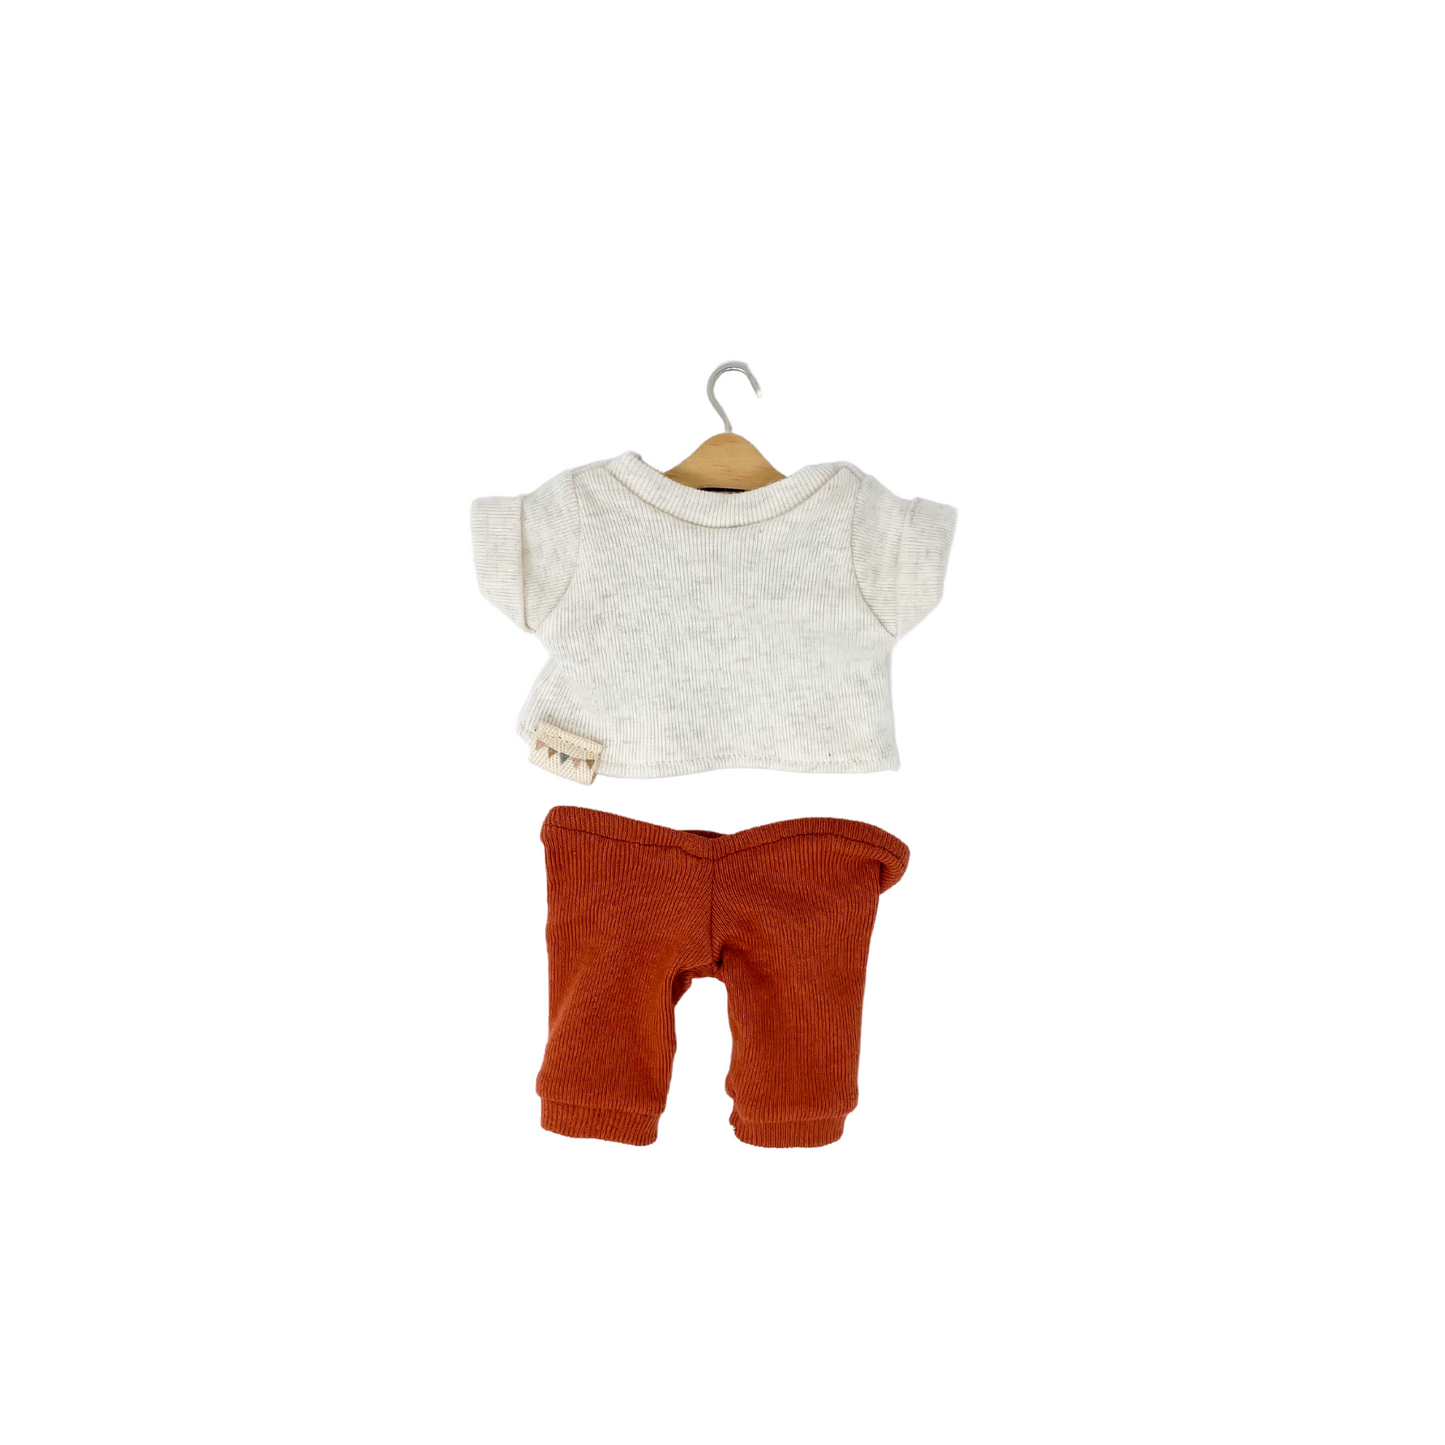 Sootie Bunny + Salt and Pepper Sweater with Leggings in Pine